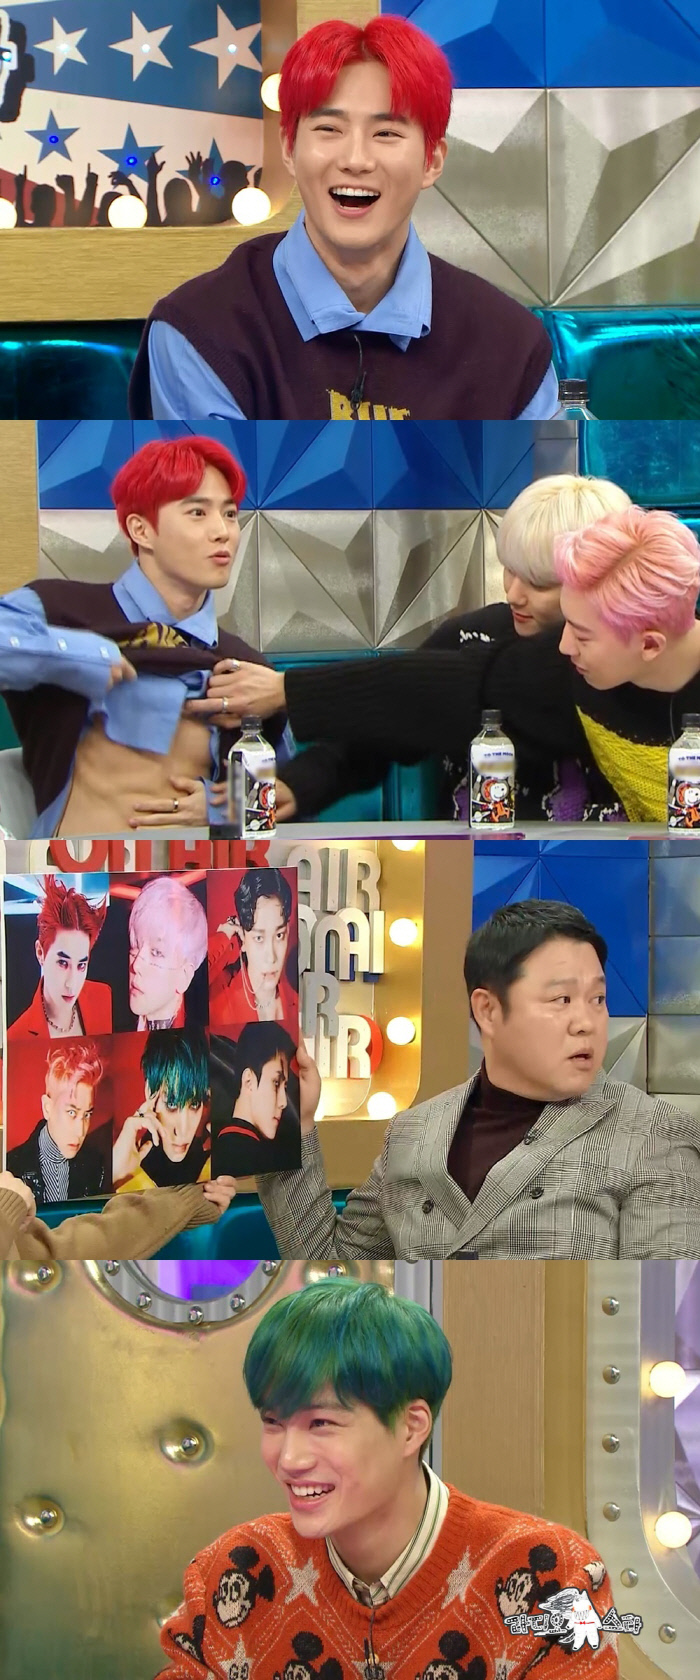 EXO Suho appears on Radio Star to reveal the sense of entertainment from the release of abdominal muscles to the release of black history.In addition, Kai will also claim to be a laughing cat, and then have a fierce battle over EXOs position as an entertainment director.MBC Radio Star (director Choi Haeng-ho, Kim Ji-woo/planned Kim Gusan), a high-quality talk show scheduled to air on the 4th (Wednesday), will feature EXO Radio Star, featuring EXO Suho, Baek Hyun, Chan Yeol, Kai, Sehoon and Chen.EXO leader Suho releases a sense of entertainment: first he has been open to the public with abdominal muscles, robbing everyone of their attention.In addition, Suho is interested in revealing the black history that is surging, but it is the back door that the members turned away from it and made a laugh.Suho expresses his regrets to Kim Gu, who was still in his heart after receiving the diss from Kim Gu in the past.Kim Gu, who heard this, is said to have poured praise such as It is an entertainment trend!Suho tells me that he is in the process of breaking the Imjingak when he sees only the idol juniors. In particular, he mentions the legendary winter jacket event in Imjingak.The video of the incident will be released and will add to the fun.In addition, Kai claims to be a laugher. He is in charge of laughter among his best friends such as BTS Jimin and Shiny Taemin.Everyone is responding that they can not believe it, and it stimulates curiosity about why Kai showed confidence in laughter.Kai also draws attention to the members who are concerned about mentality, saying that the person seems to be affected by the evil.I am curious about who is the main character who received the worry of the members.EXO Suho and Kais contest for entertainment can be found on Radio Star, which is broadcasted at 11:05 pm on Wednesday, December 4.